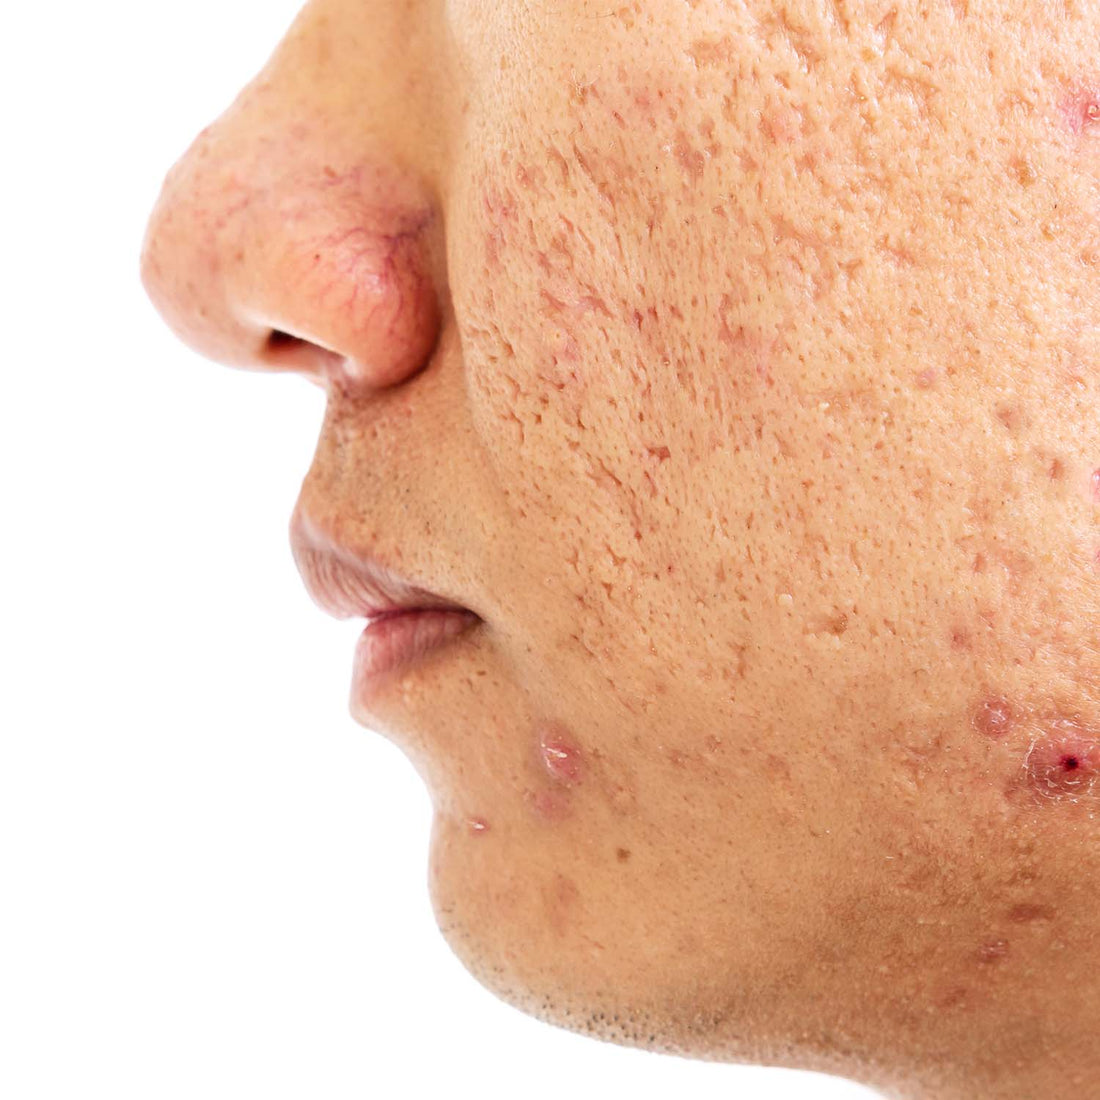 Discover the realities of acne scars with this close-up image, highlighting the textured aftermath of healed acne, from shallow indentations to subtle skin discolorations—a testament to the journey of skin healing.